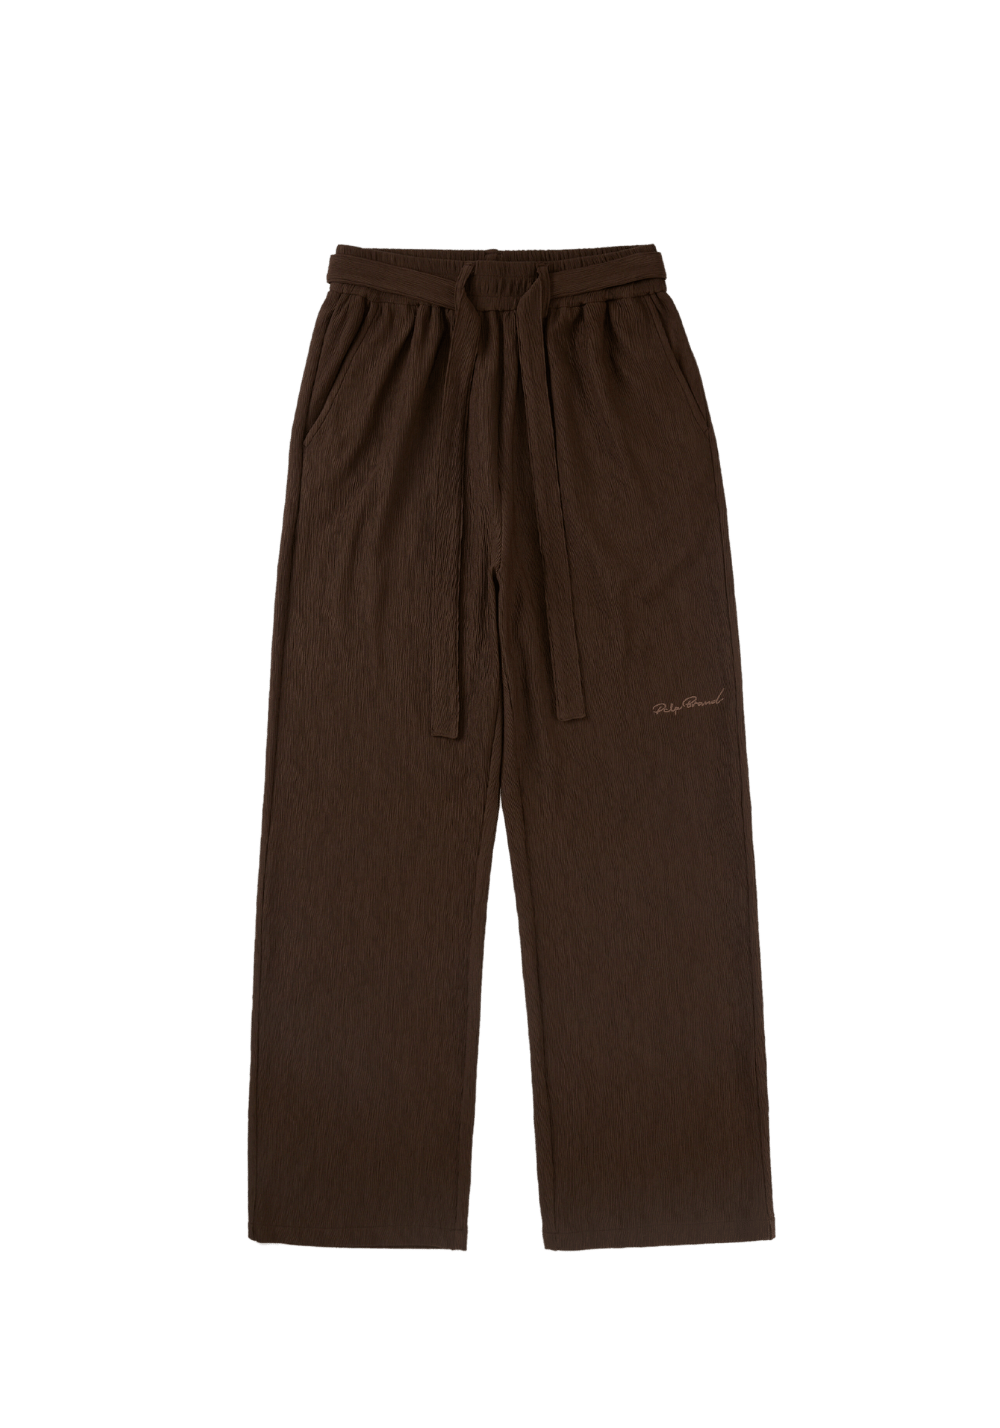 Embroidered Casual Straight Leg Pants - PSYLOS 1, Embroidered Casual Straight Leg Pants, Pants, PCLP, PSYLOS 1